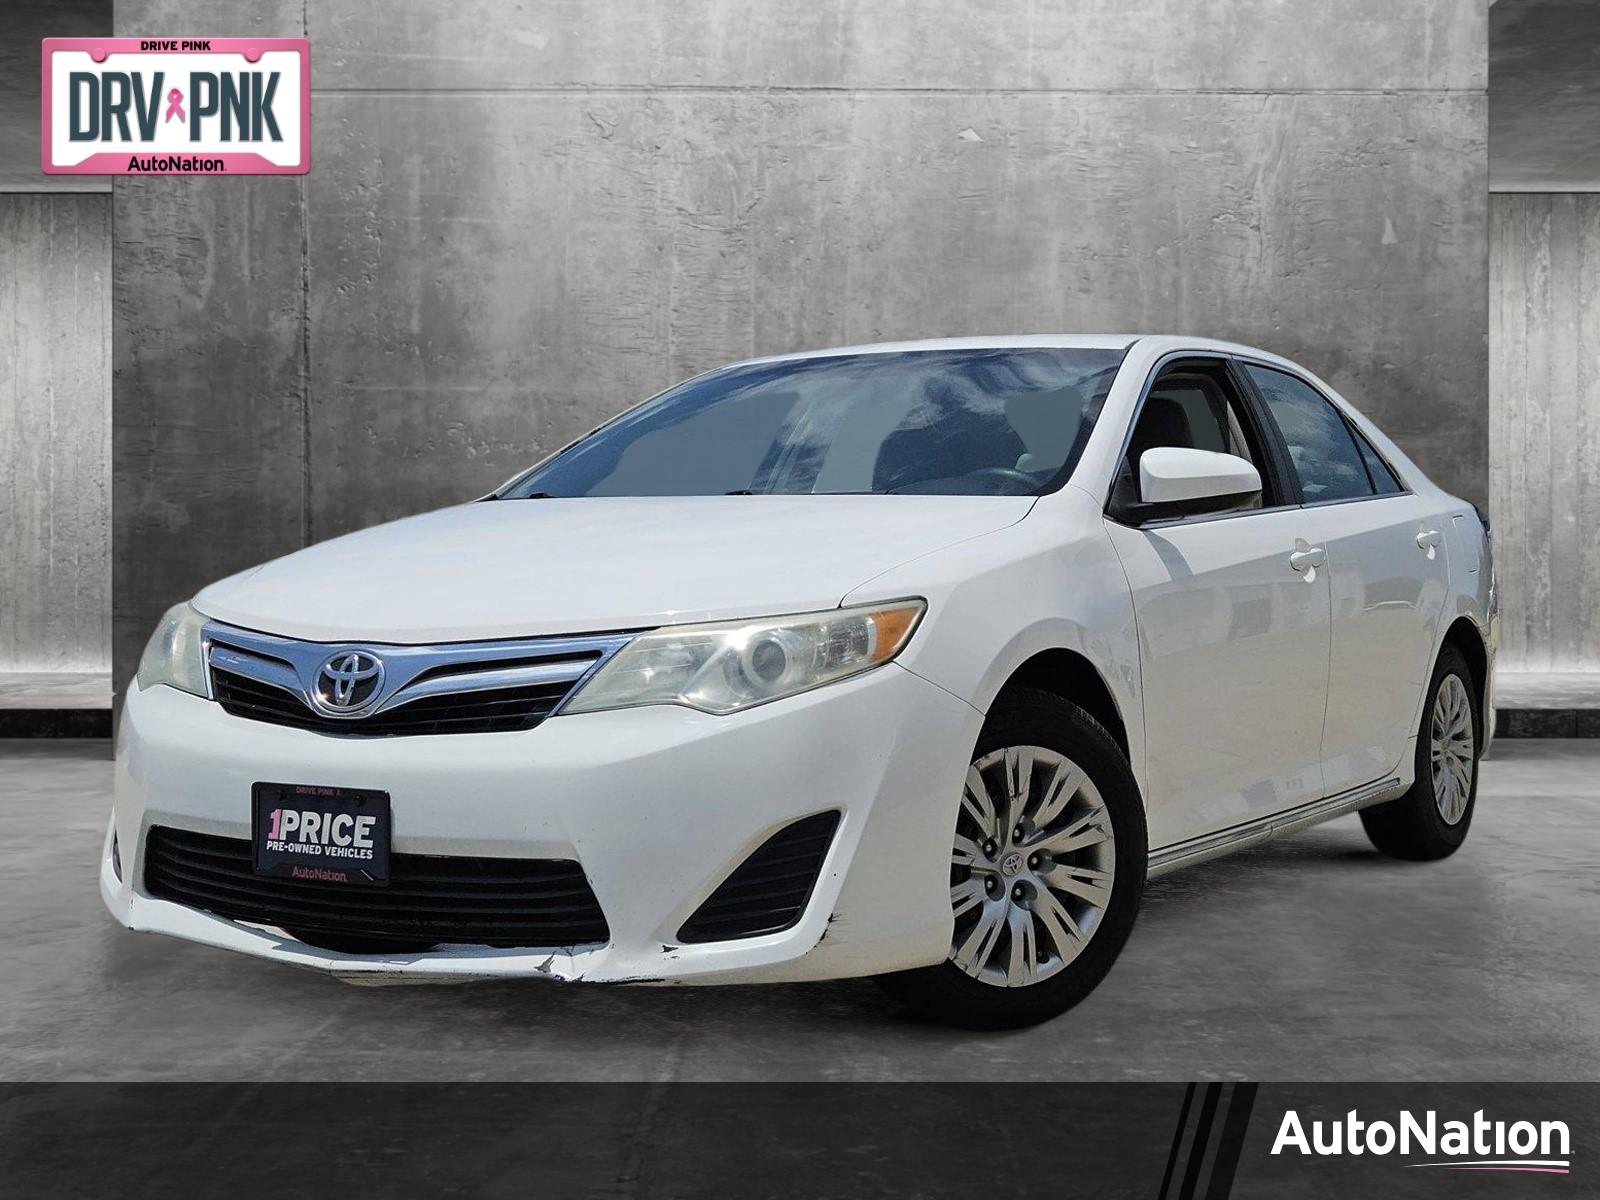 2013 Toyota Camry Vehicle Photo in NORTH RICHLAND HILLS, TX 76180-7199